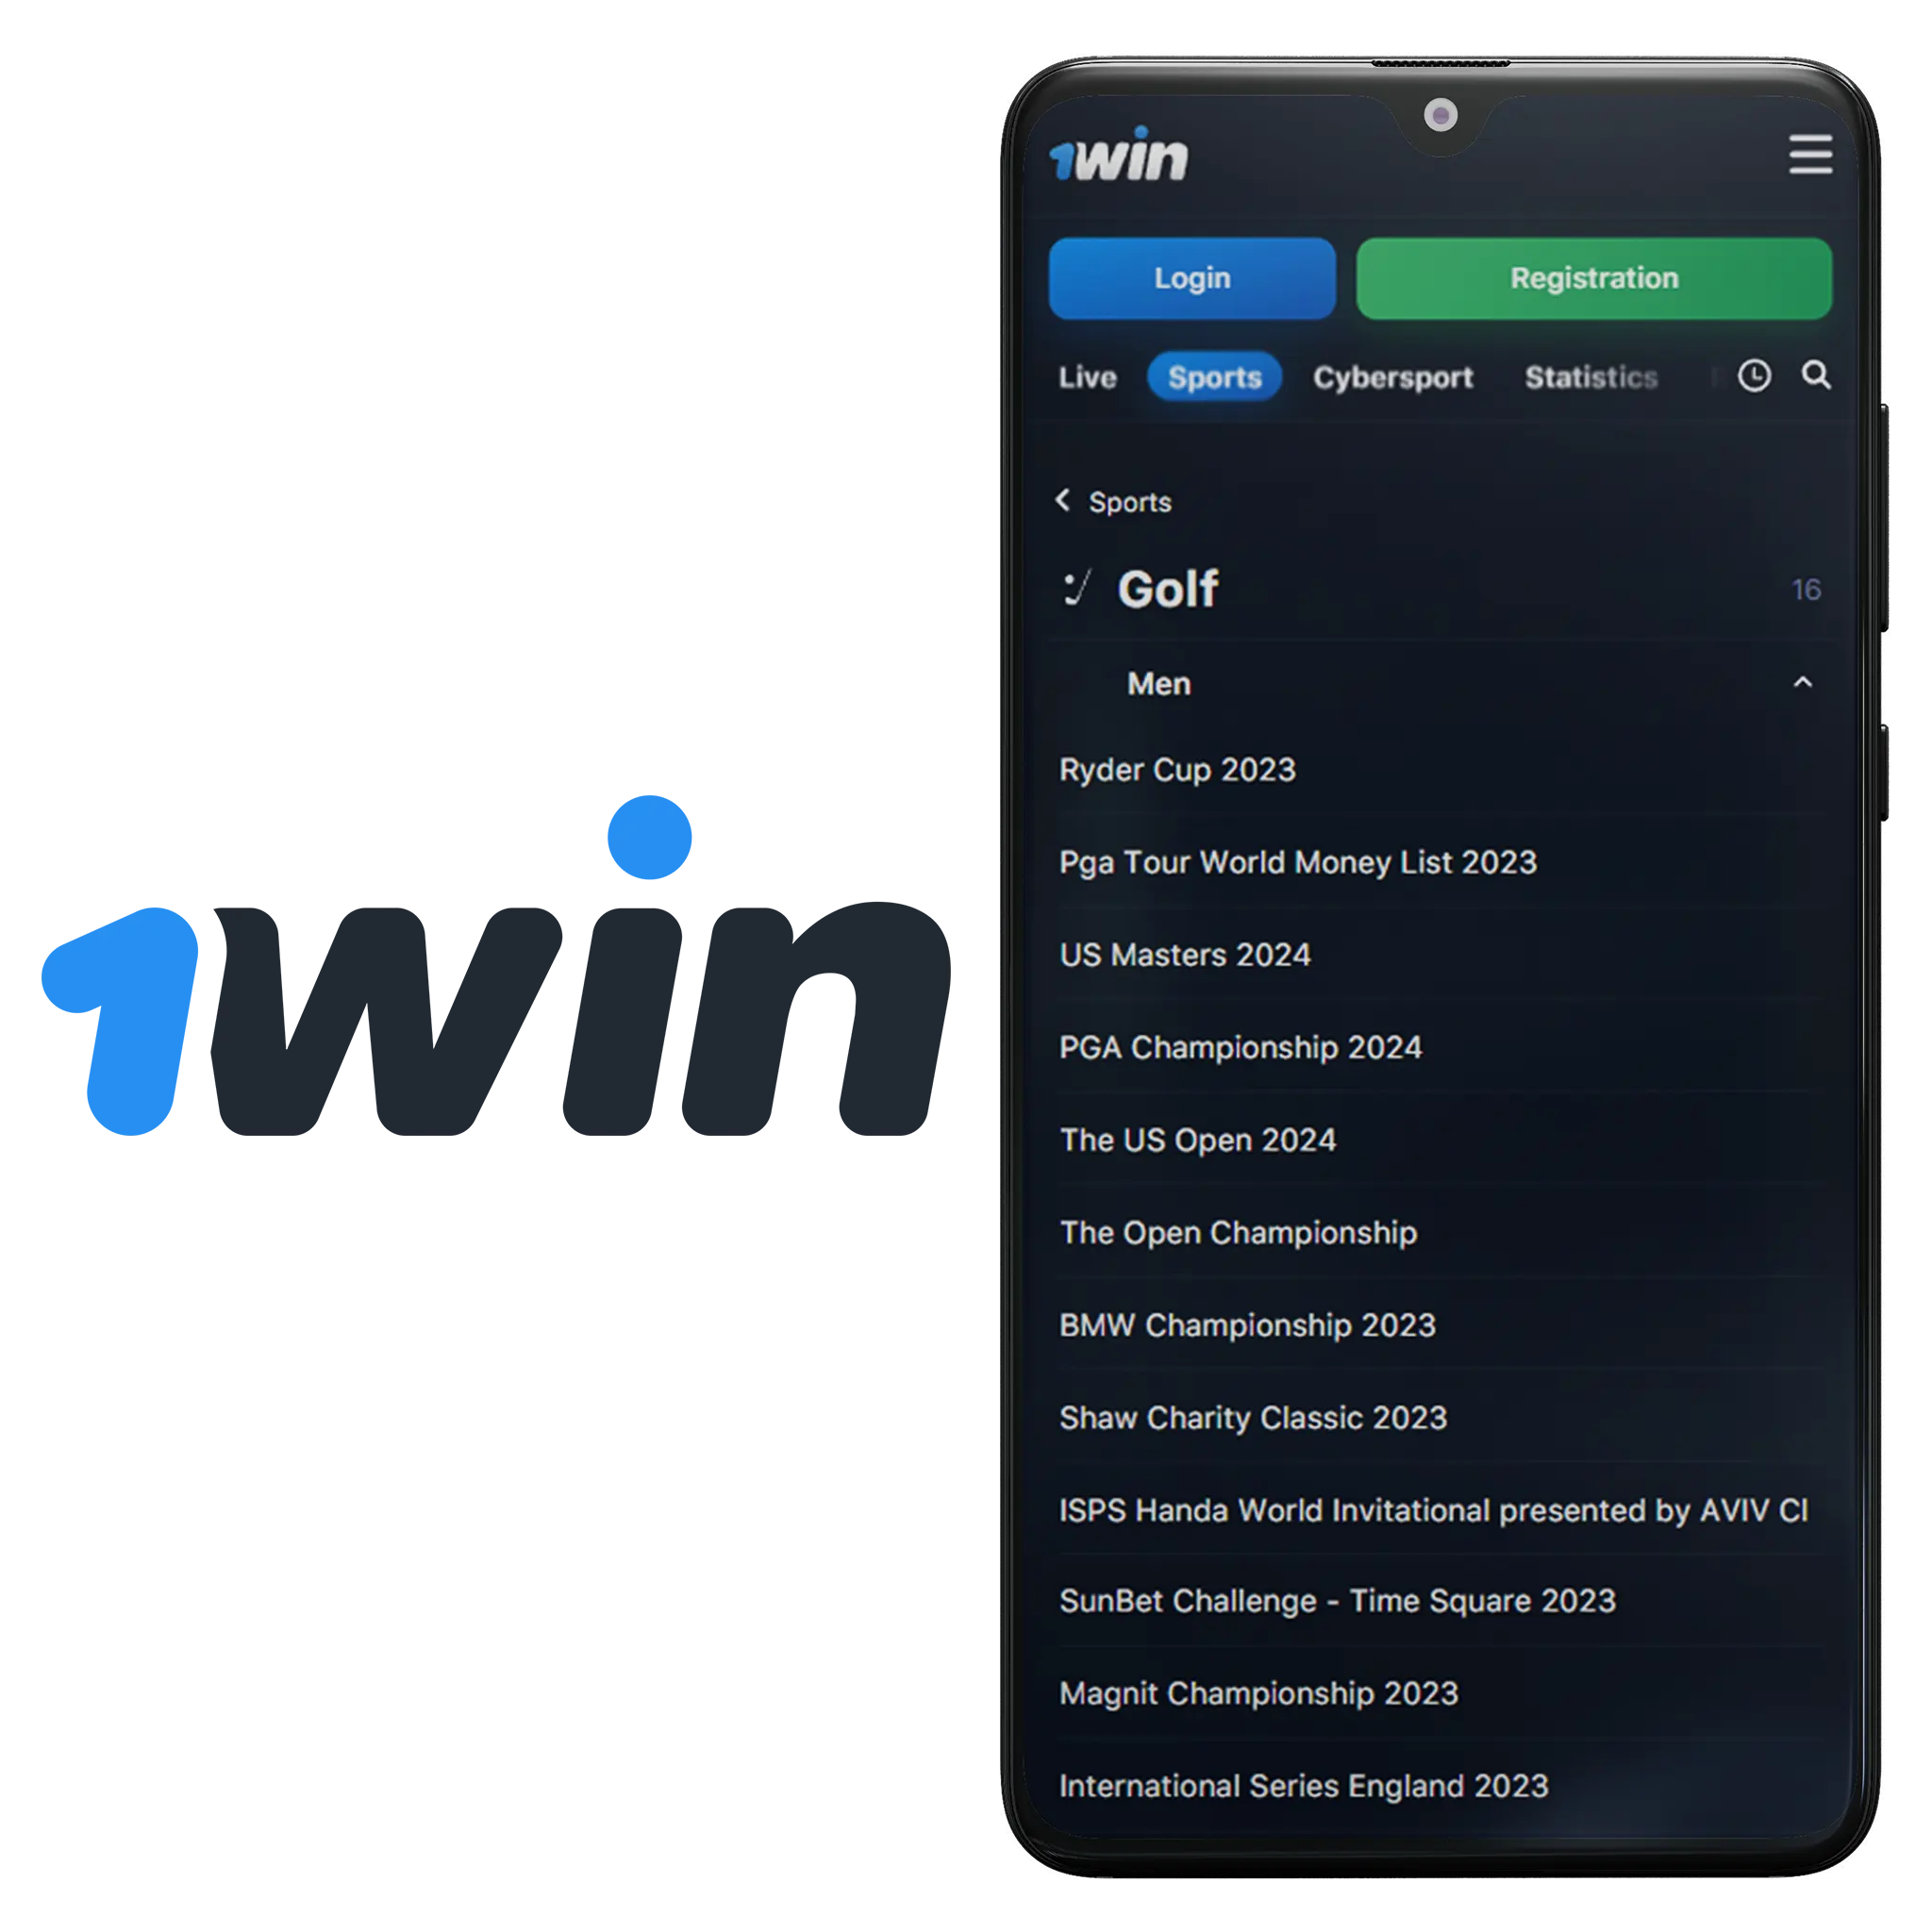 1win app for golf betting games is available for iOS and Android.